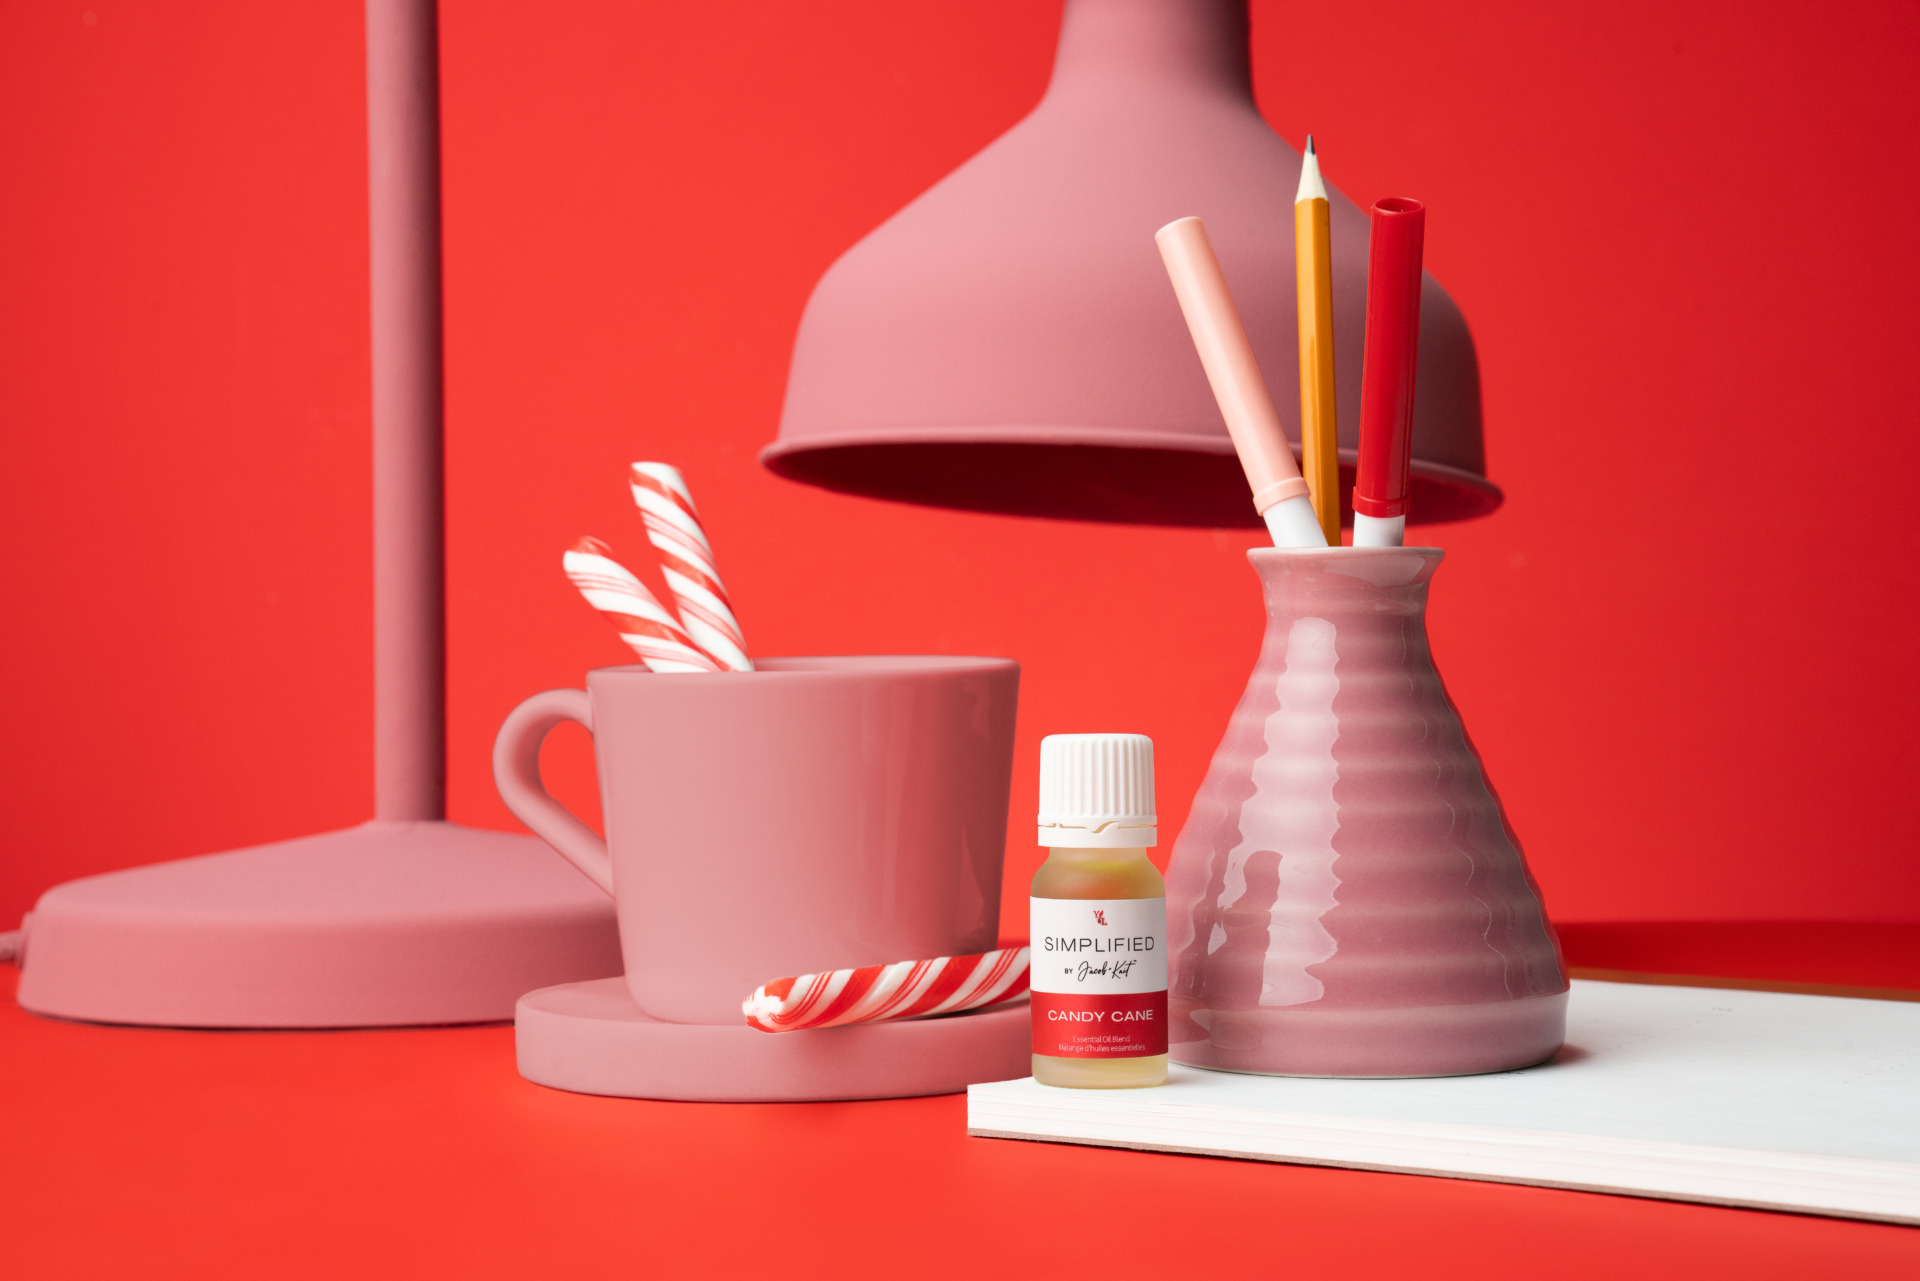 Candy Cane essential oil blend